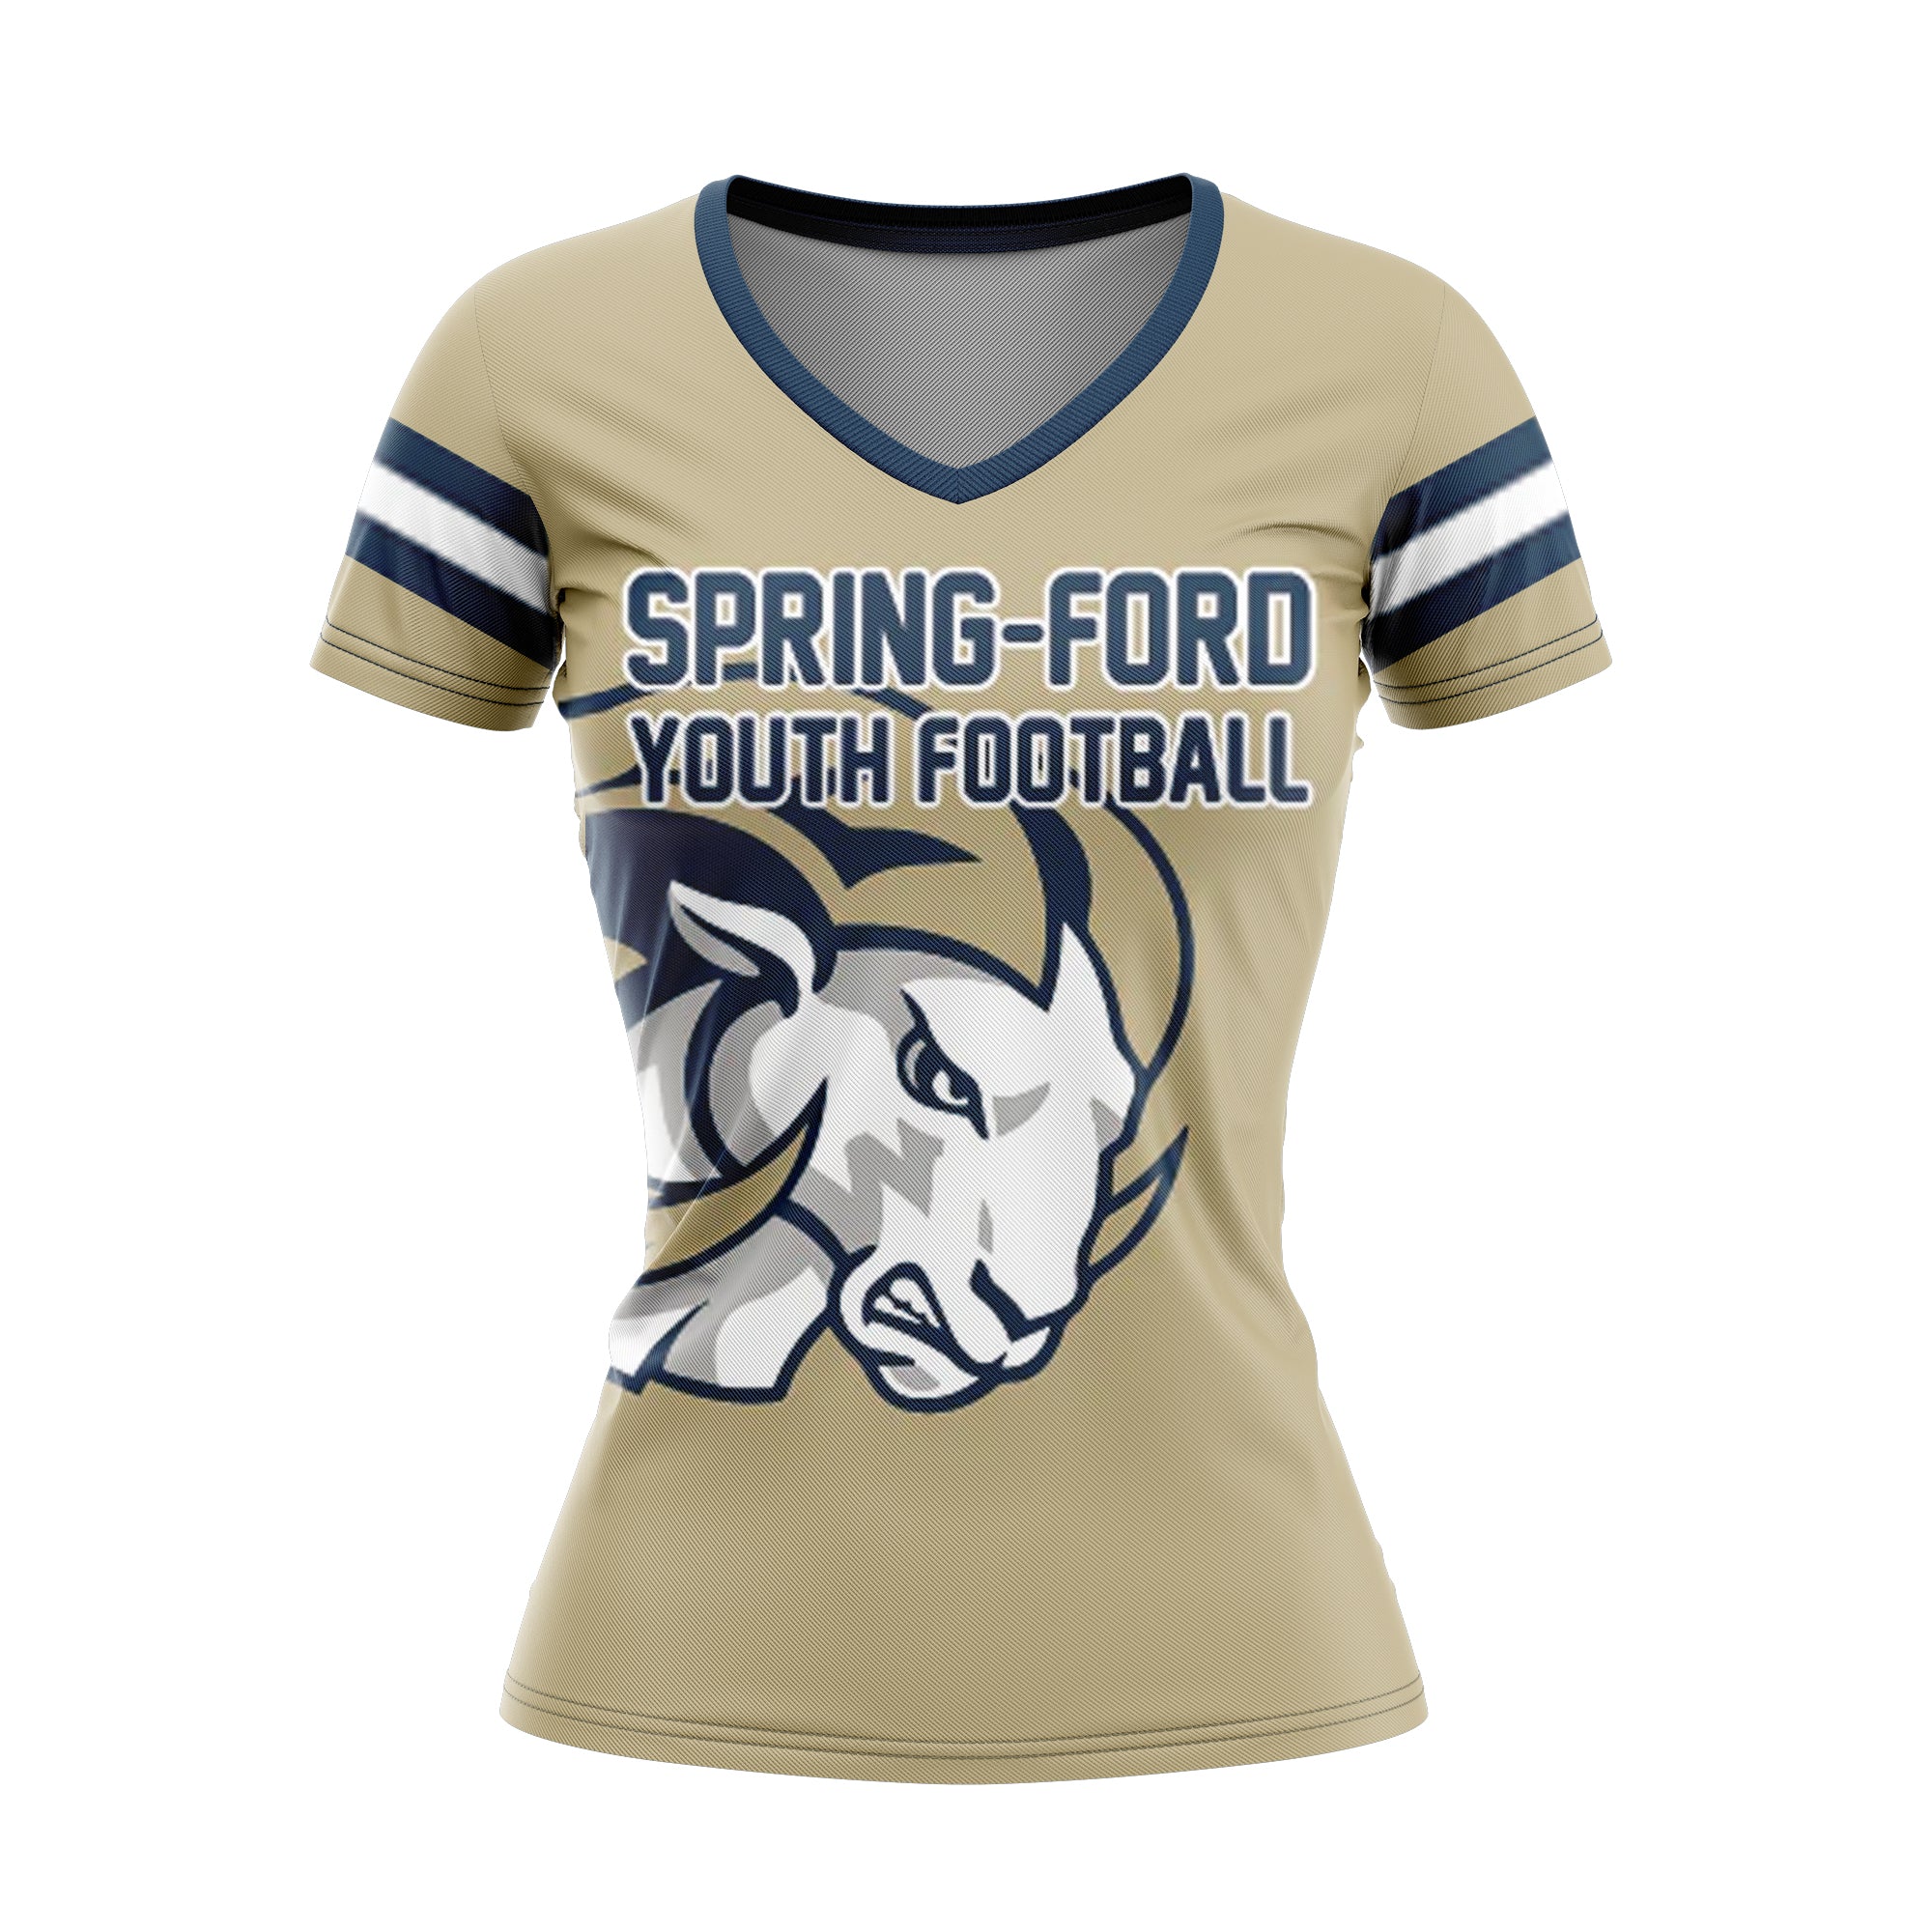 SPRING-FORD YOUTH FOOTBALL Cap Sleeve Shirt